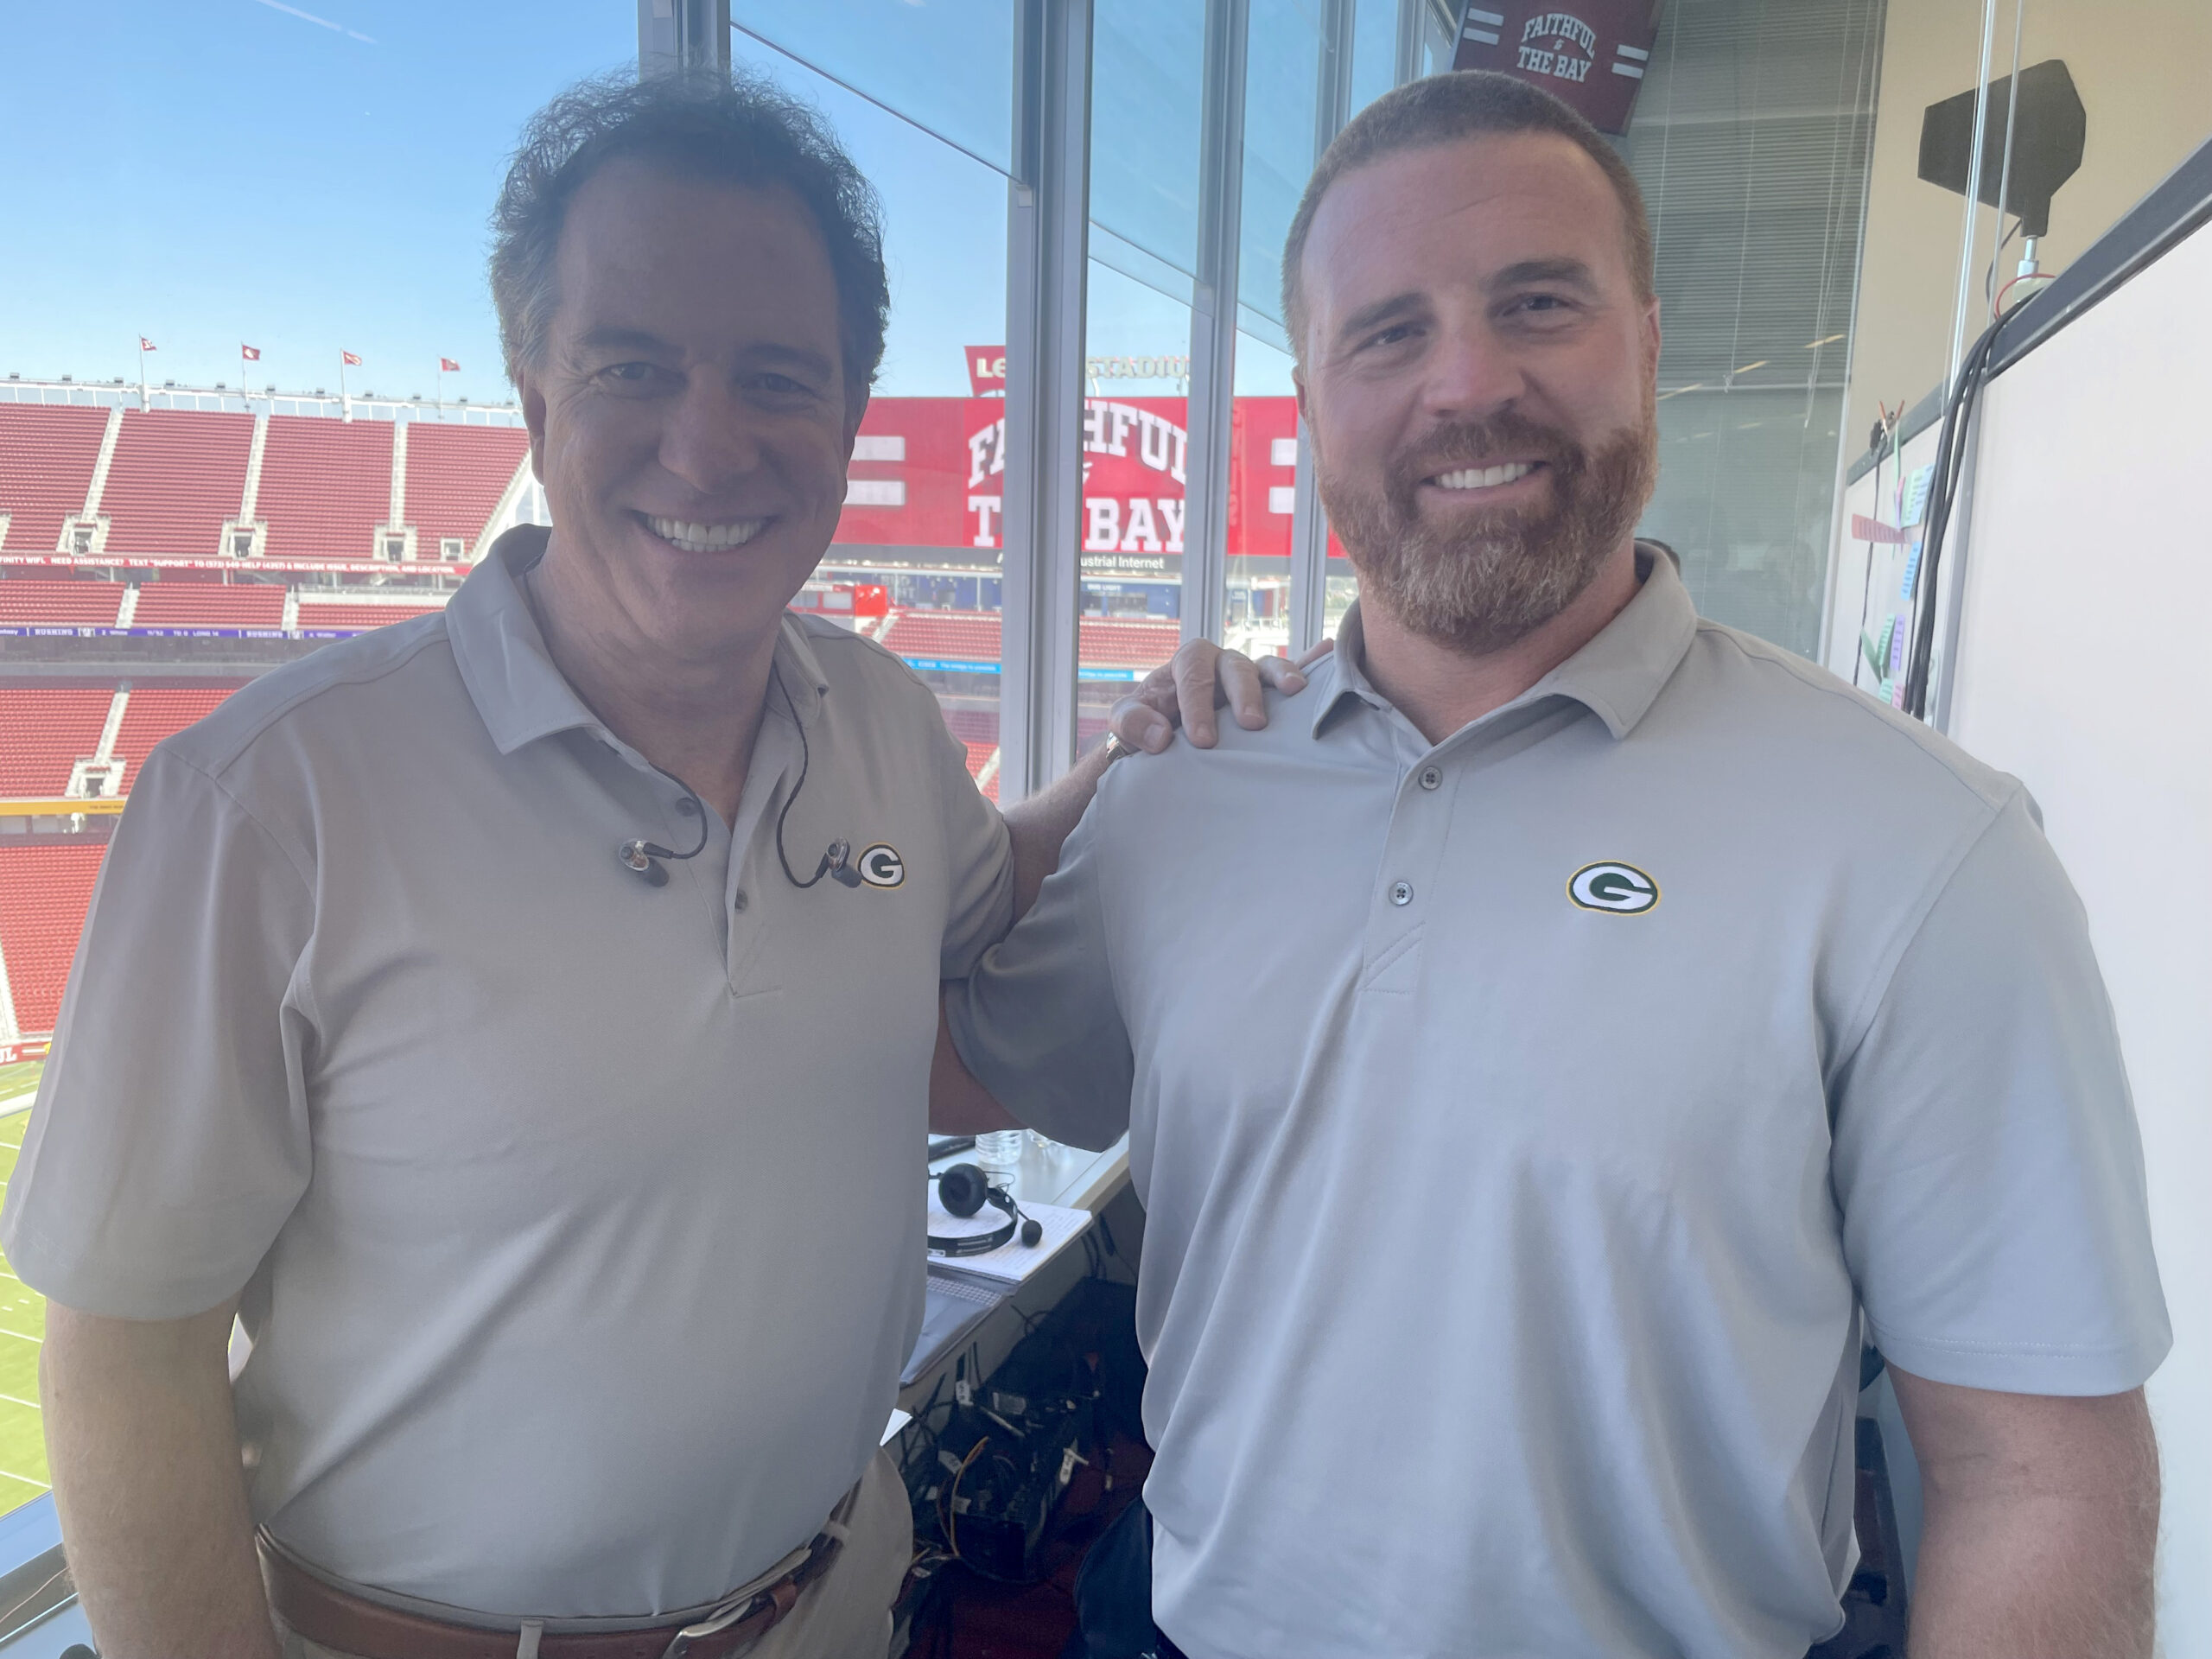 Kuhn tries his hand as color analyst for the Green Bay Packers